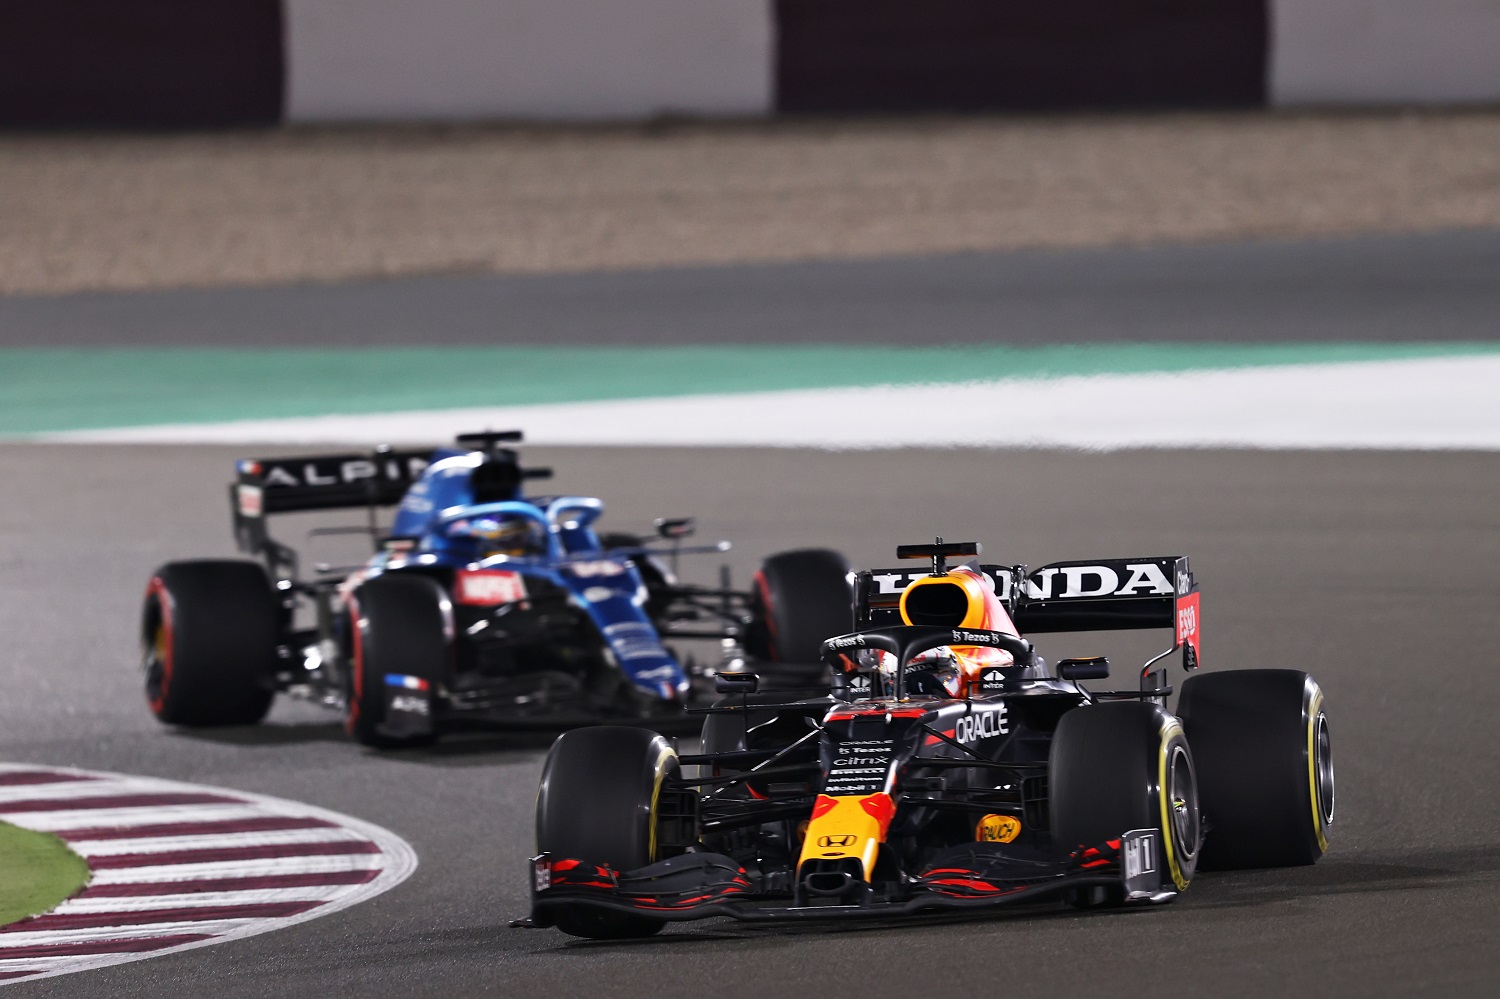 Max Verstappen of Red Bull Racing has added excitement to the Formula 1 season by building a lead over seven-time series champion Lewis Hamilton with two races remaining in the season. | Lars Baron/Getty Images